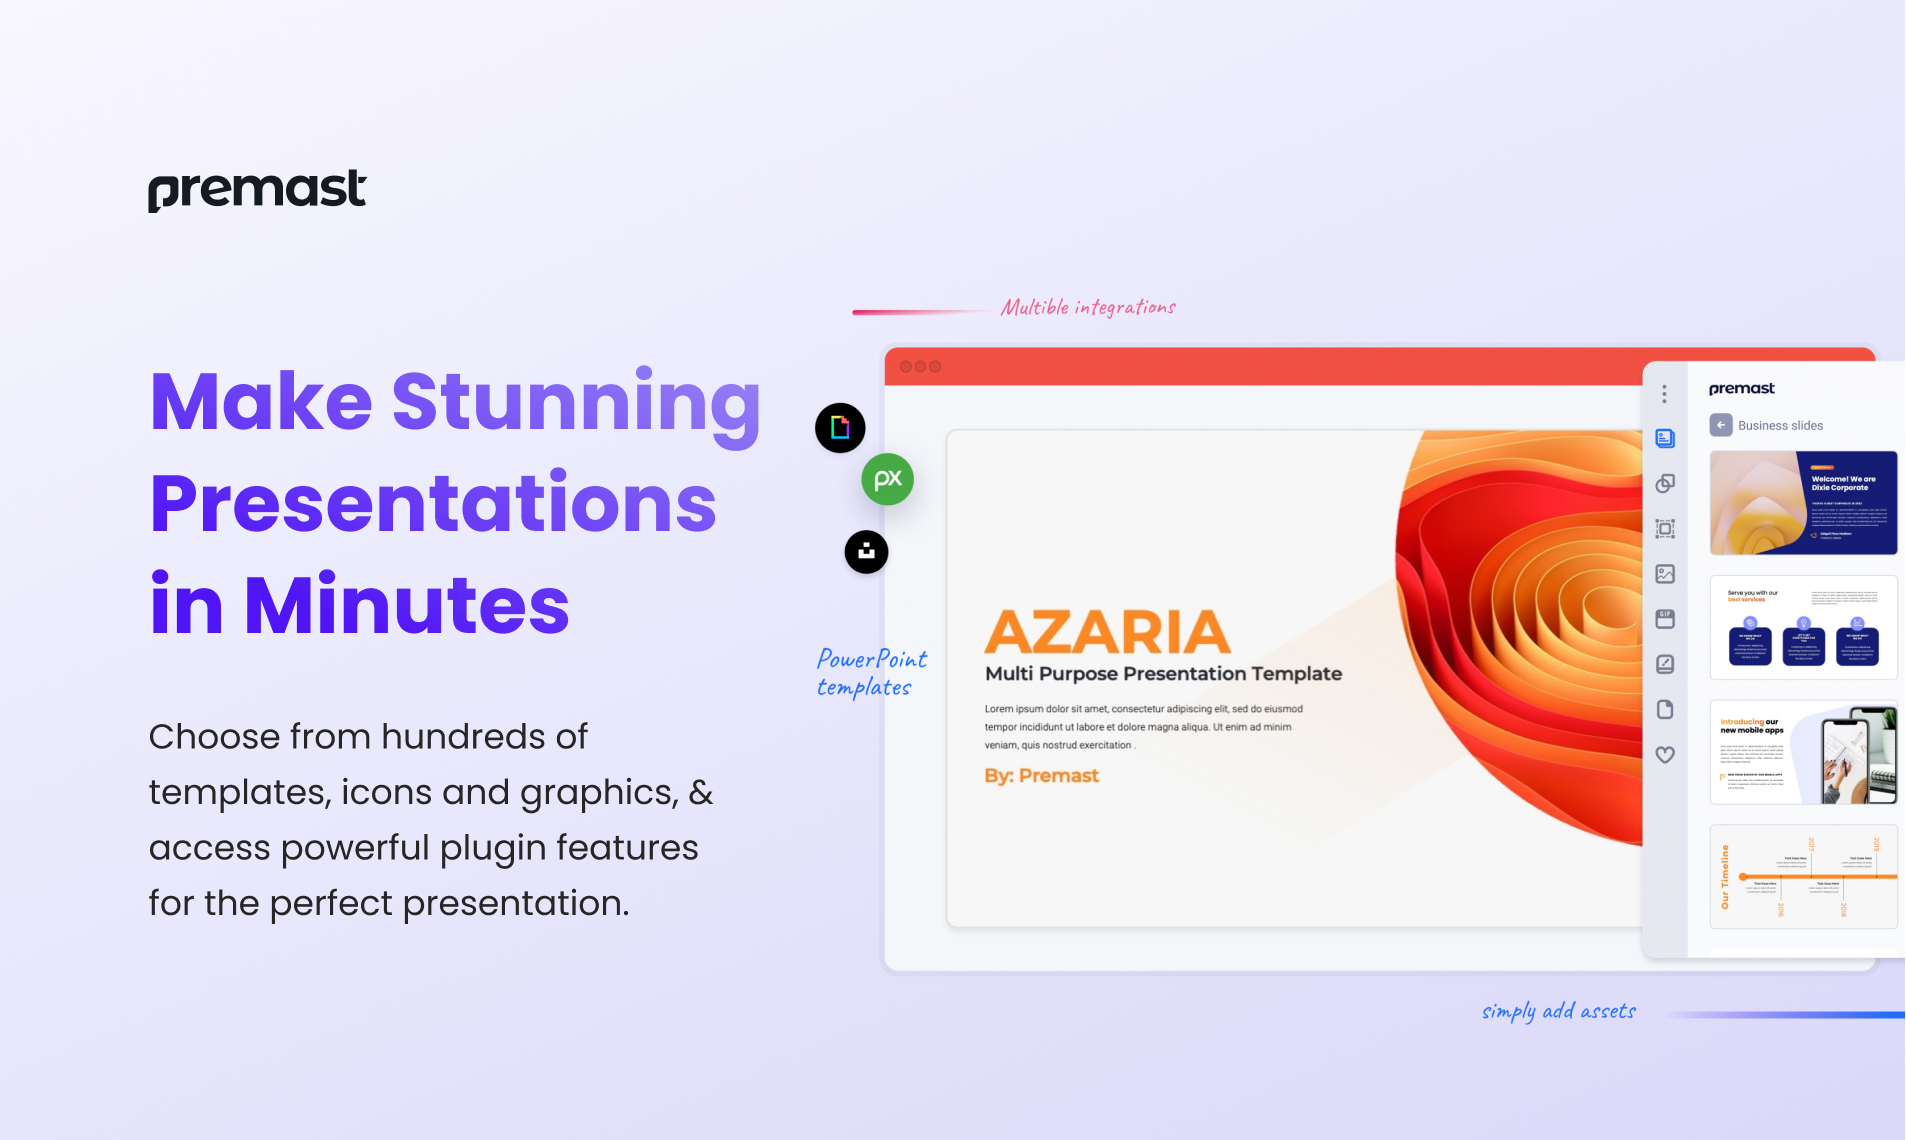 Make Stunning Presentations in Minutes